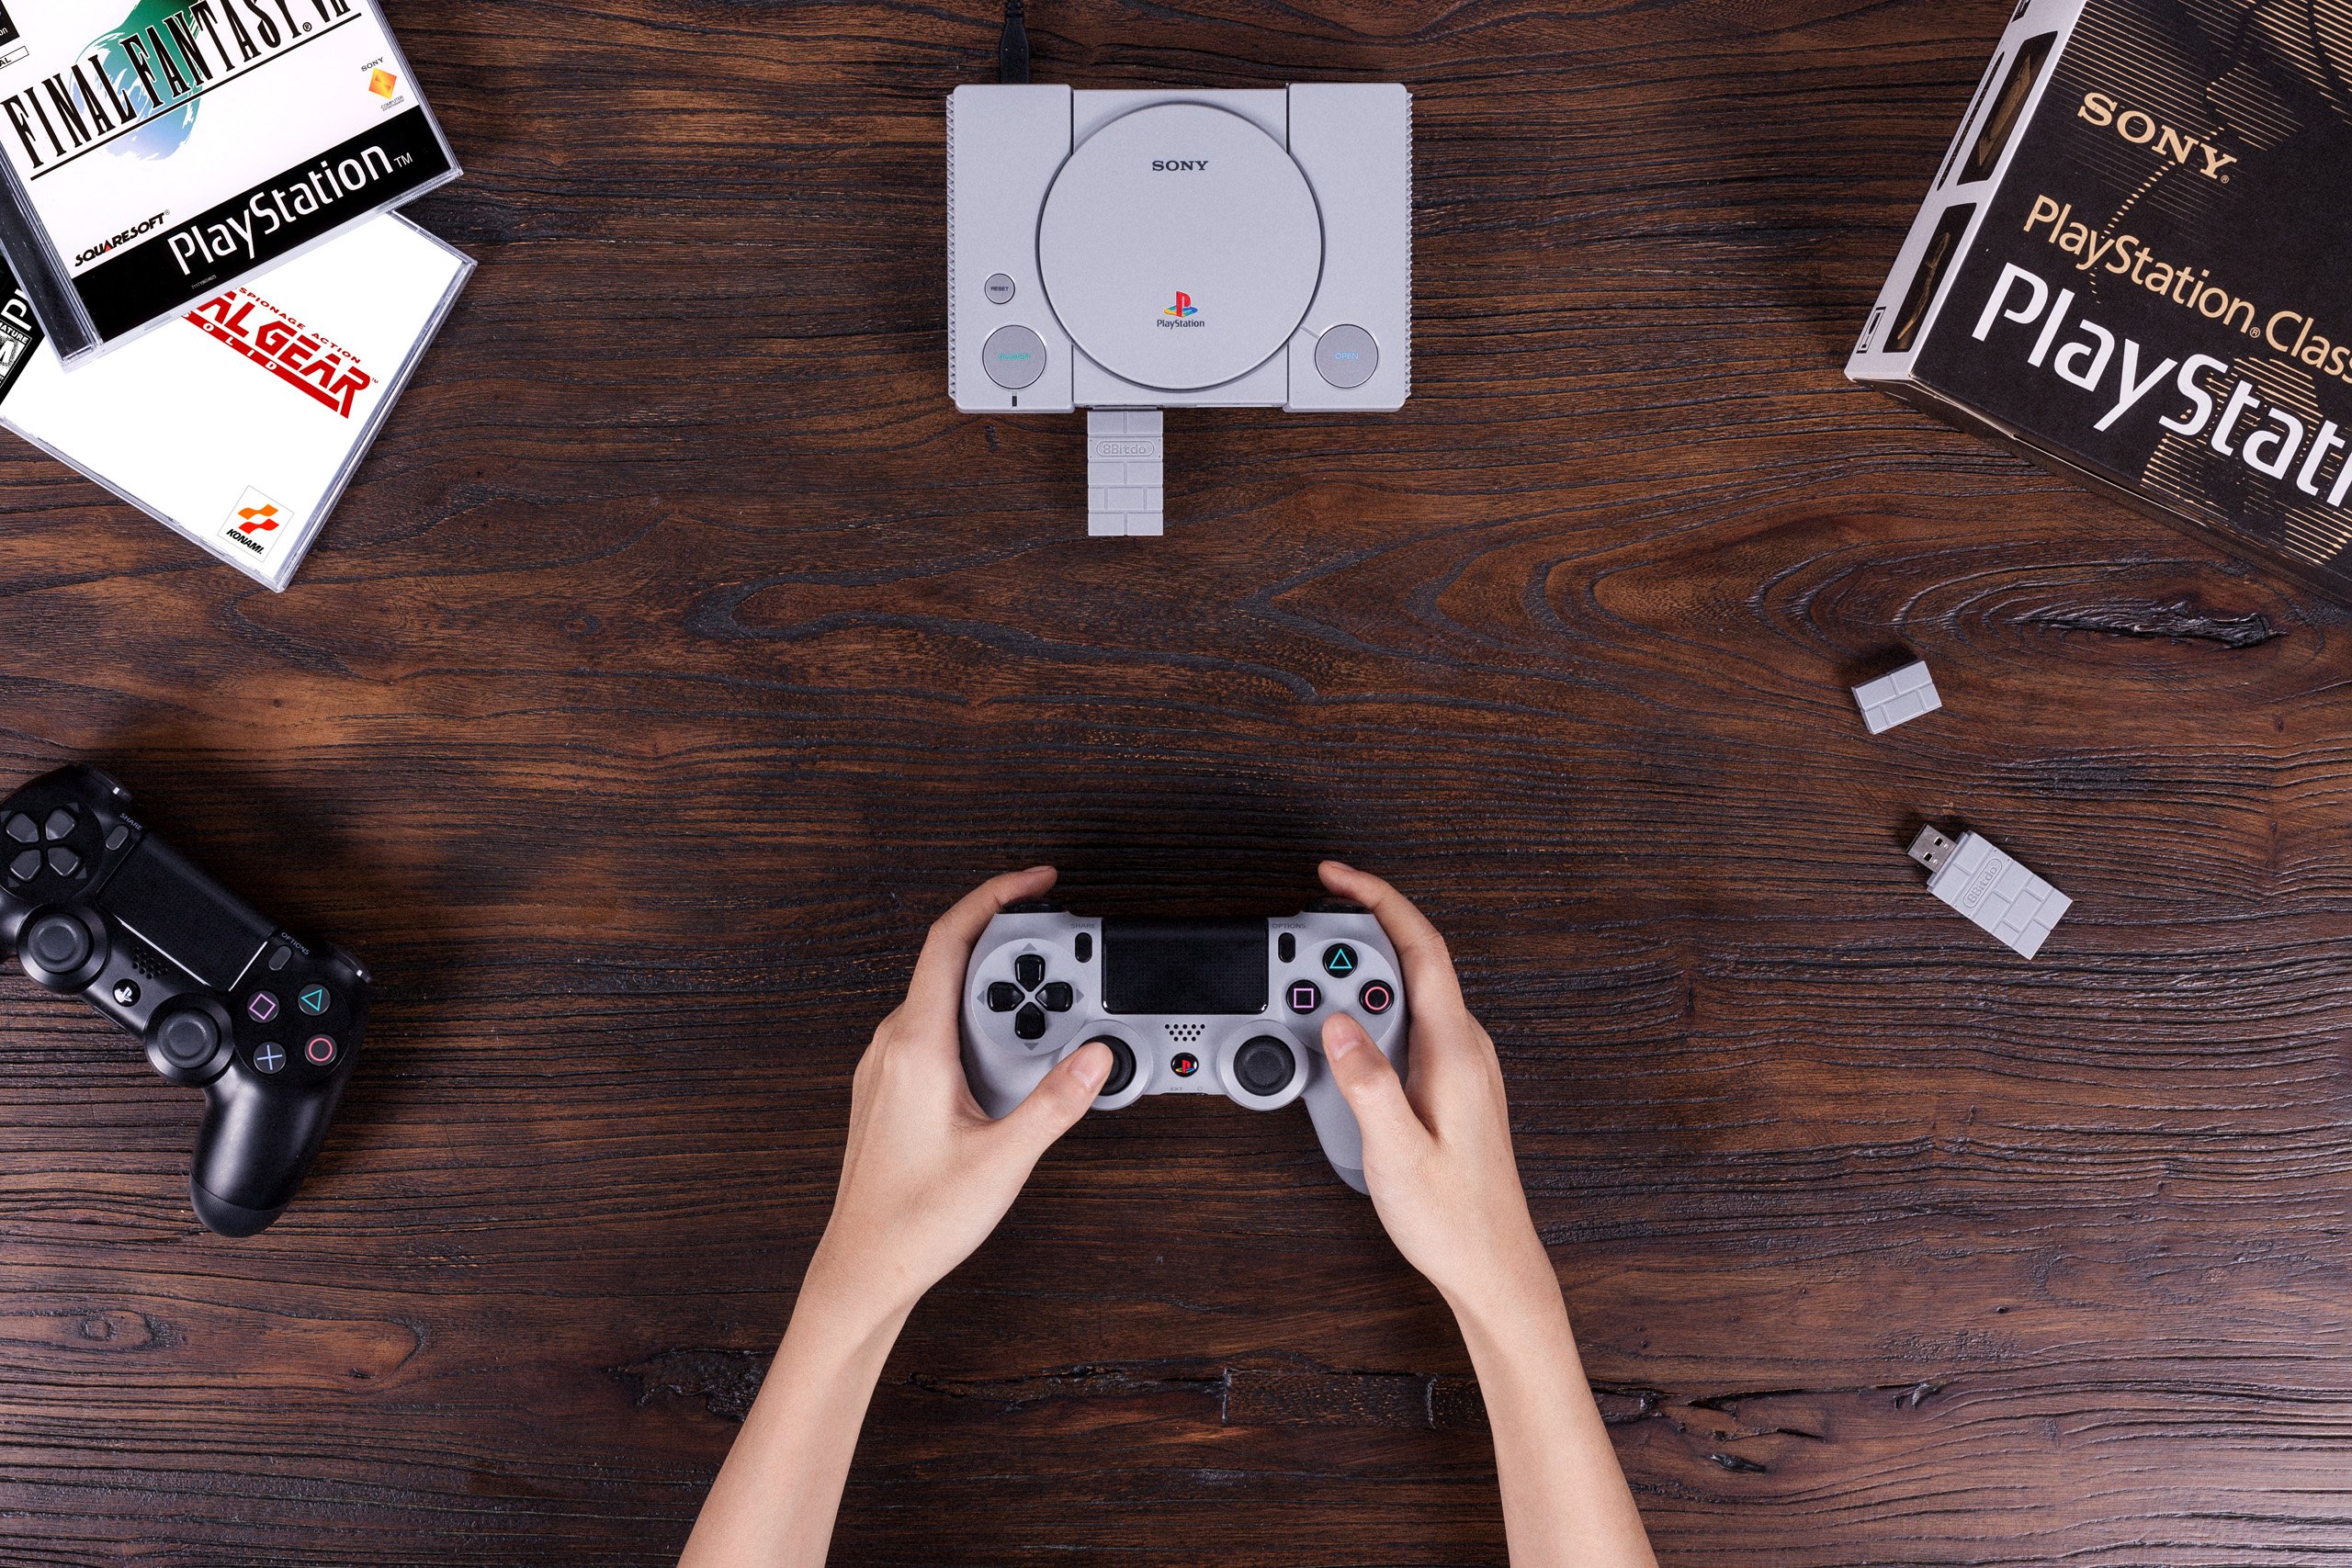 te Lille bitte Ægte 8BitDo on Twitter: "Play your PS1 Classic Edition, wirelessly, with any PS4  controller (and more). Pre-order yours now for $19.99 -  https://t.co/m3FPl6bmYv https://t.co/D29SSmgfLA" / Twitter